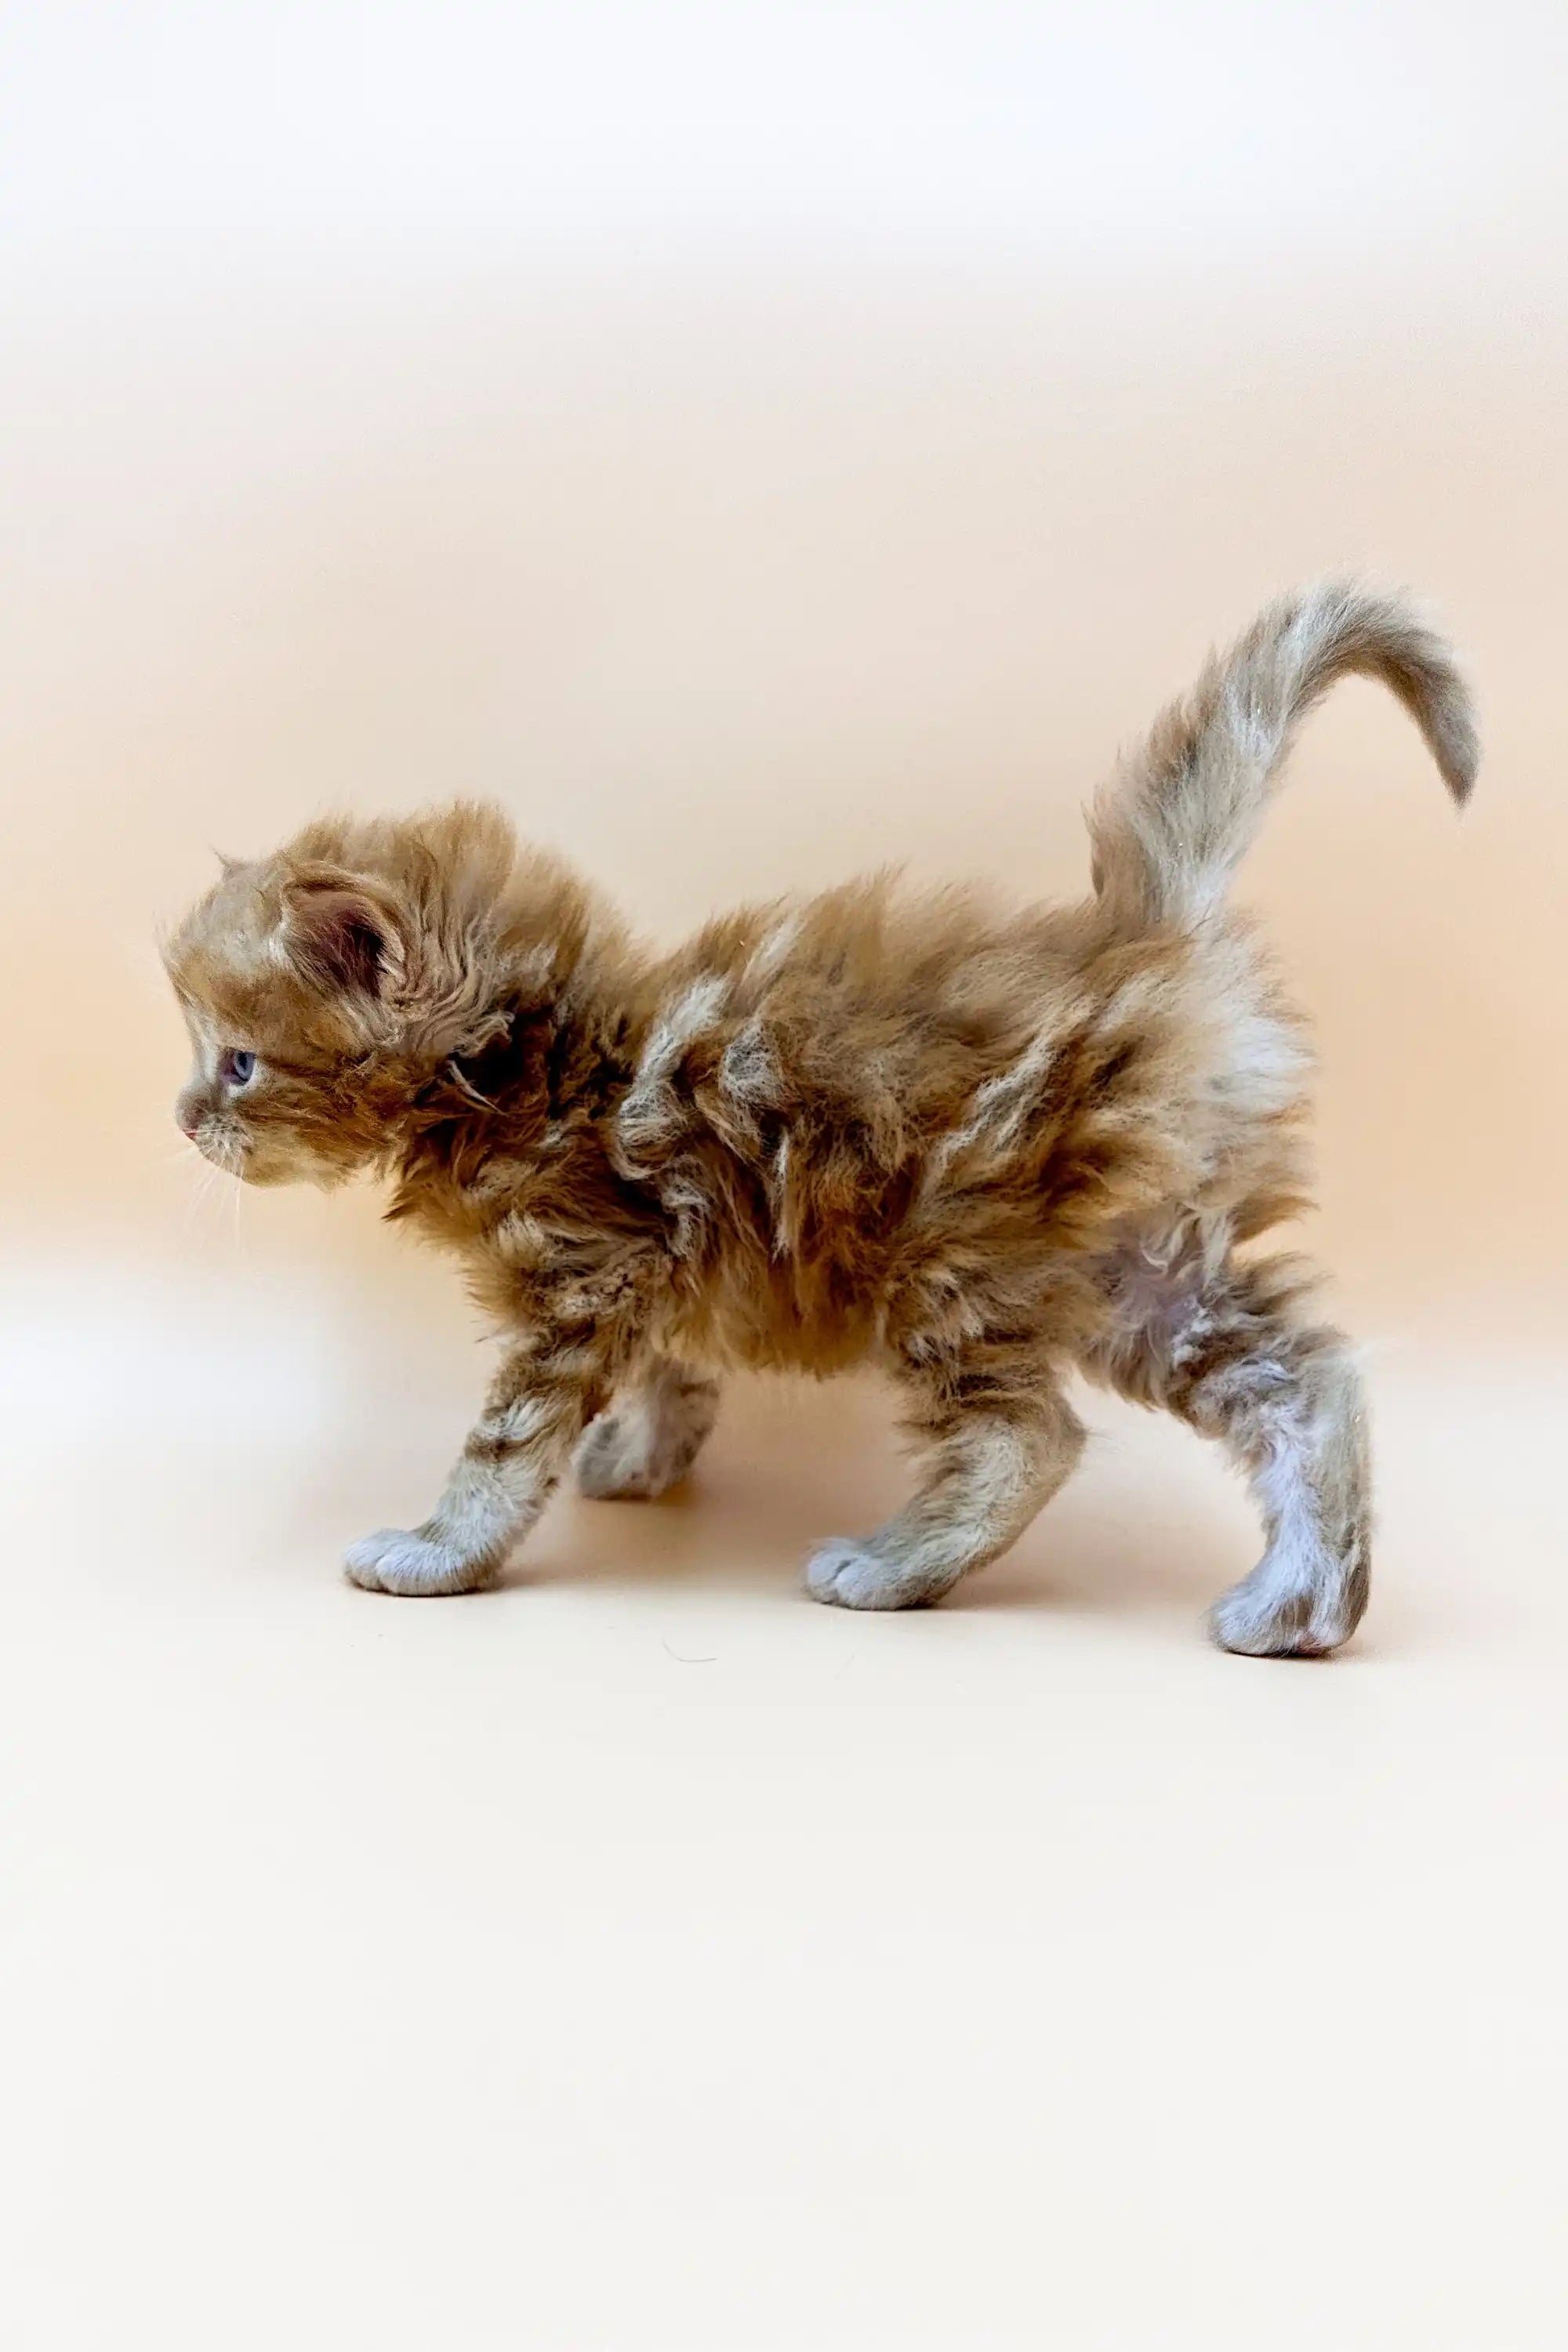 Maine Coon Kittens for Sale Yamay | Kitten